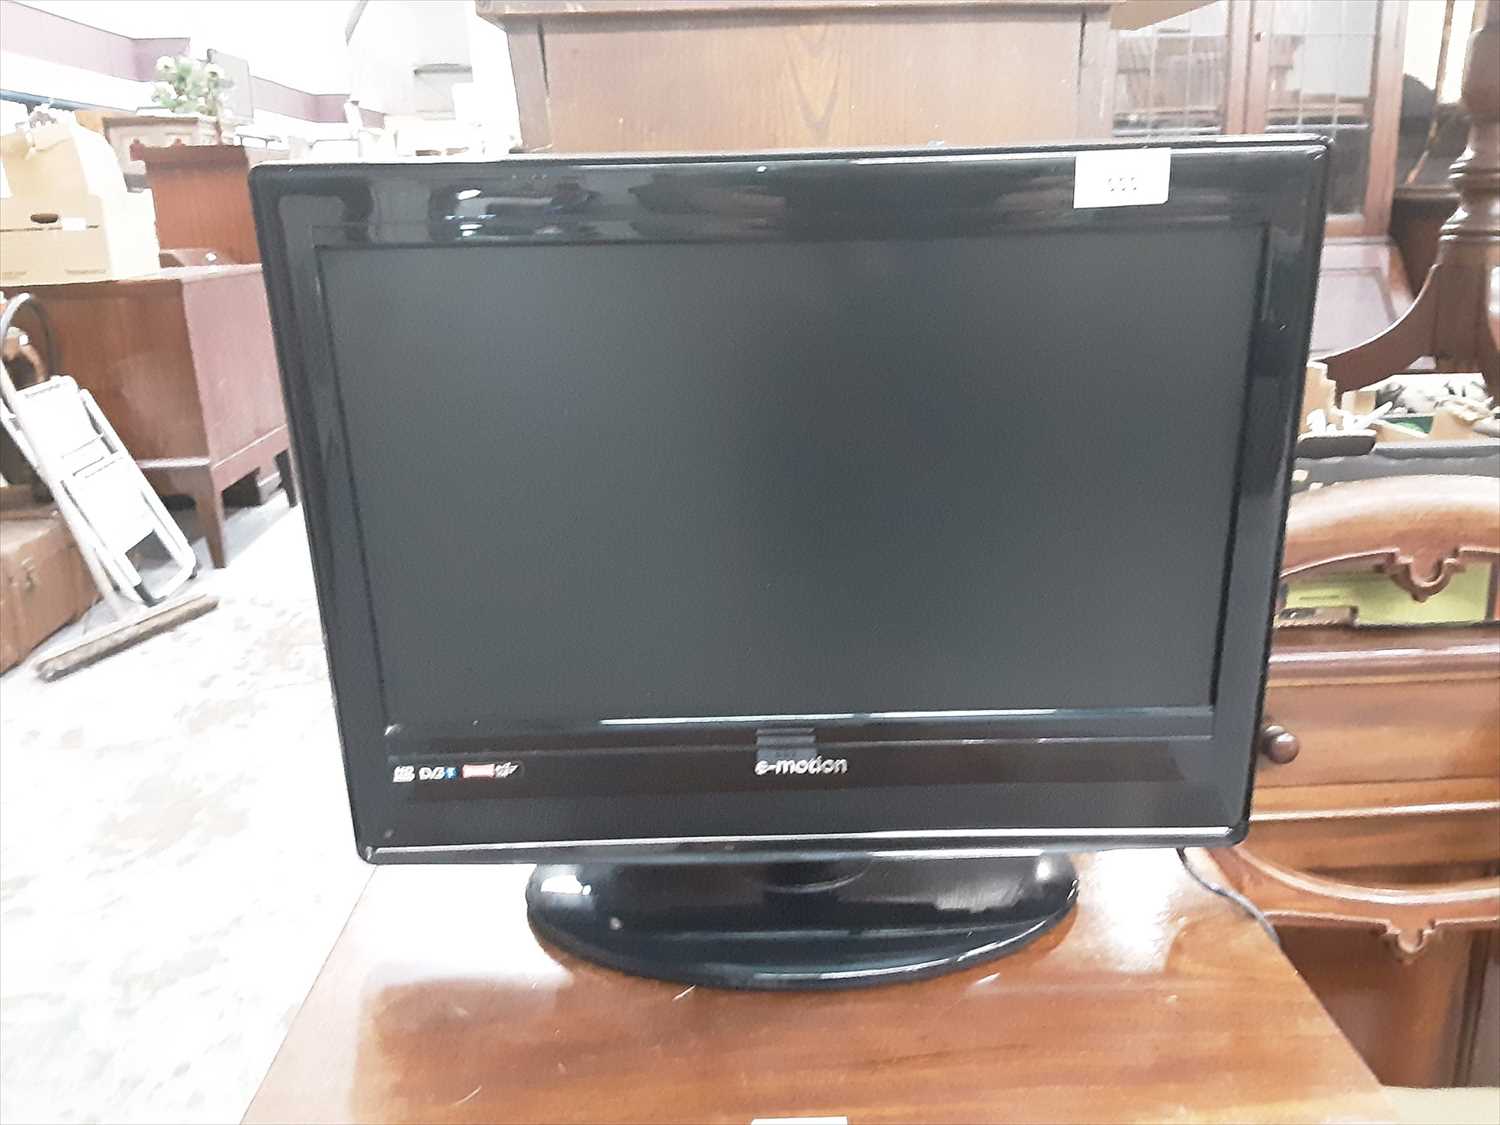 Lot 7 - E-motion 19" LCD Television